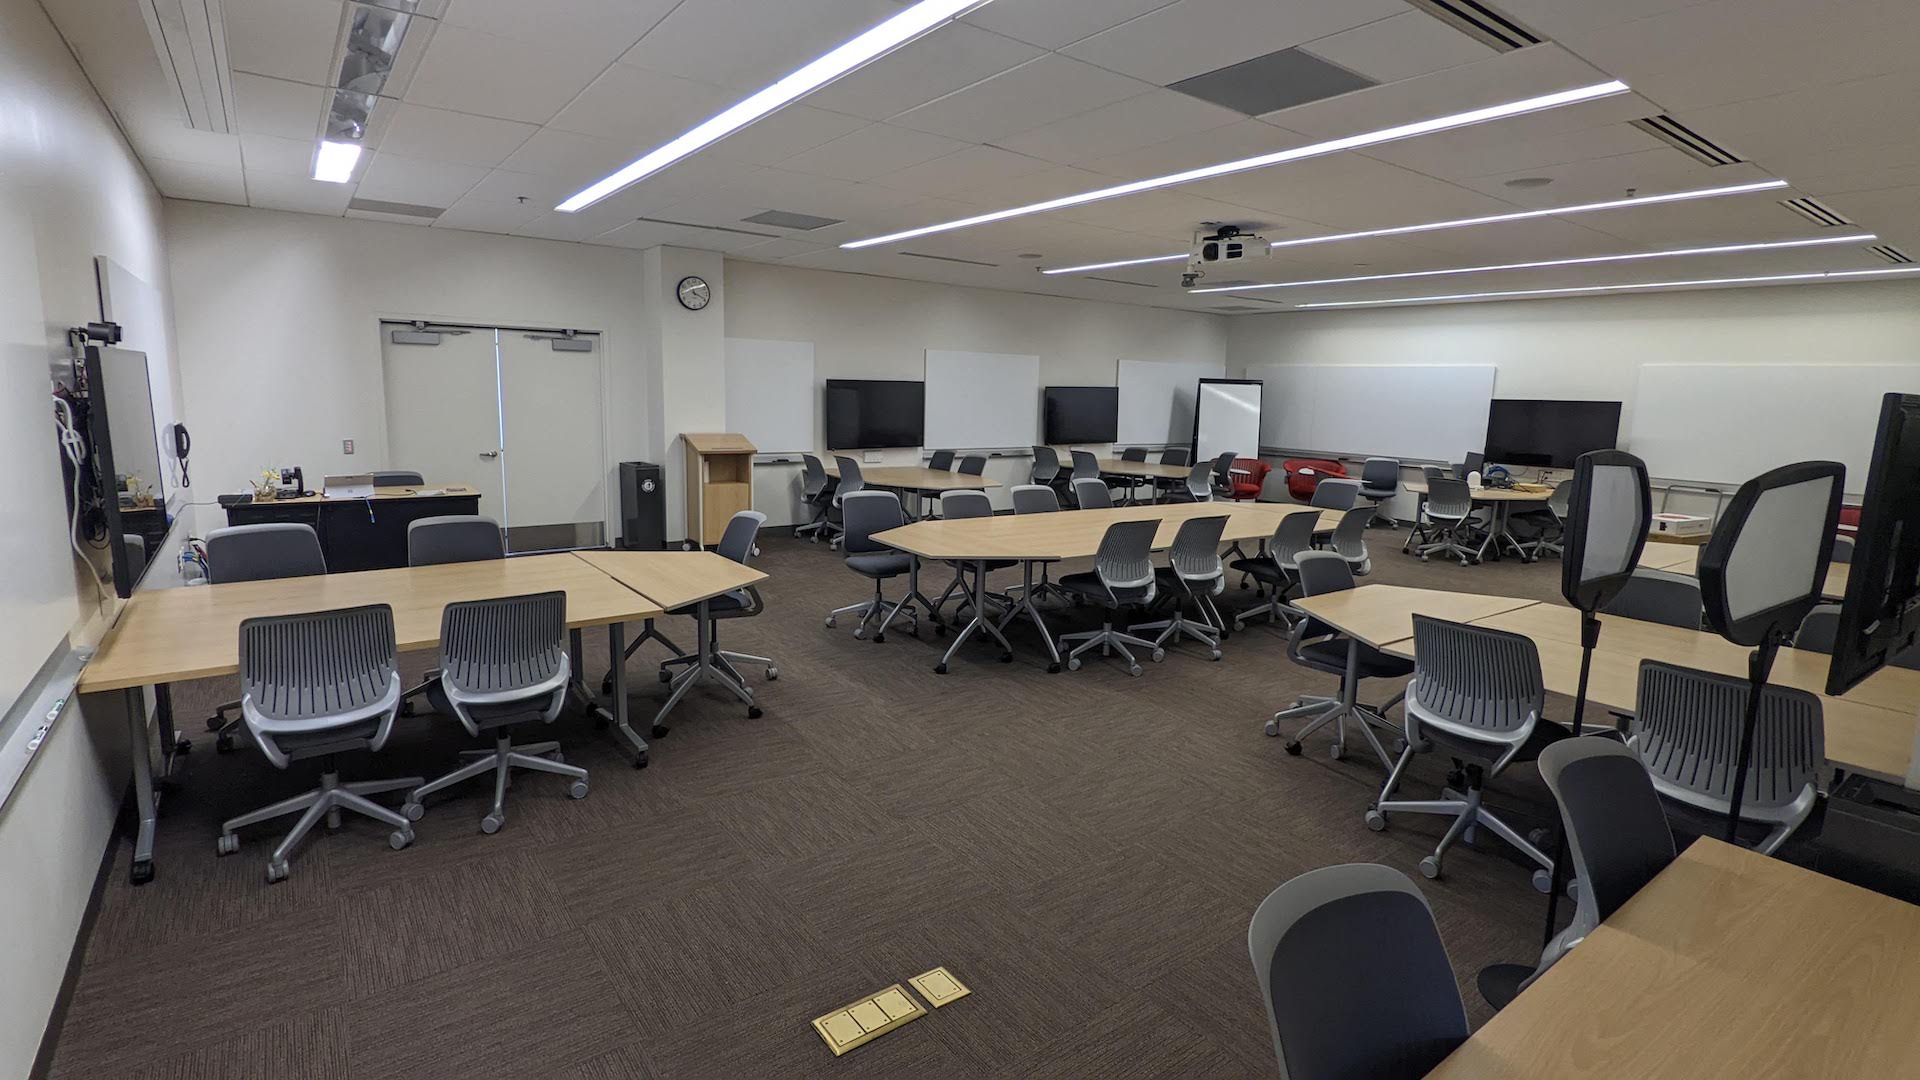 large meeting space with a conference table in the center and standalone meeting tables around the perimeter